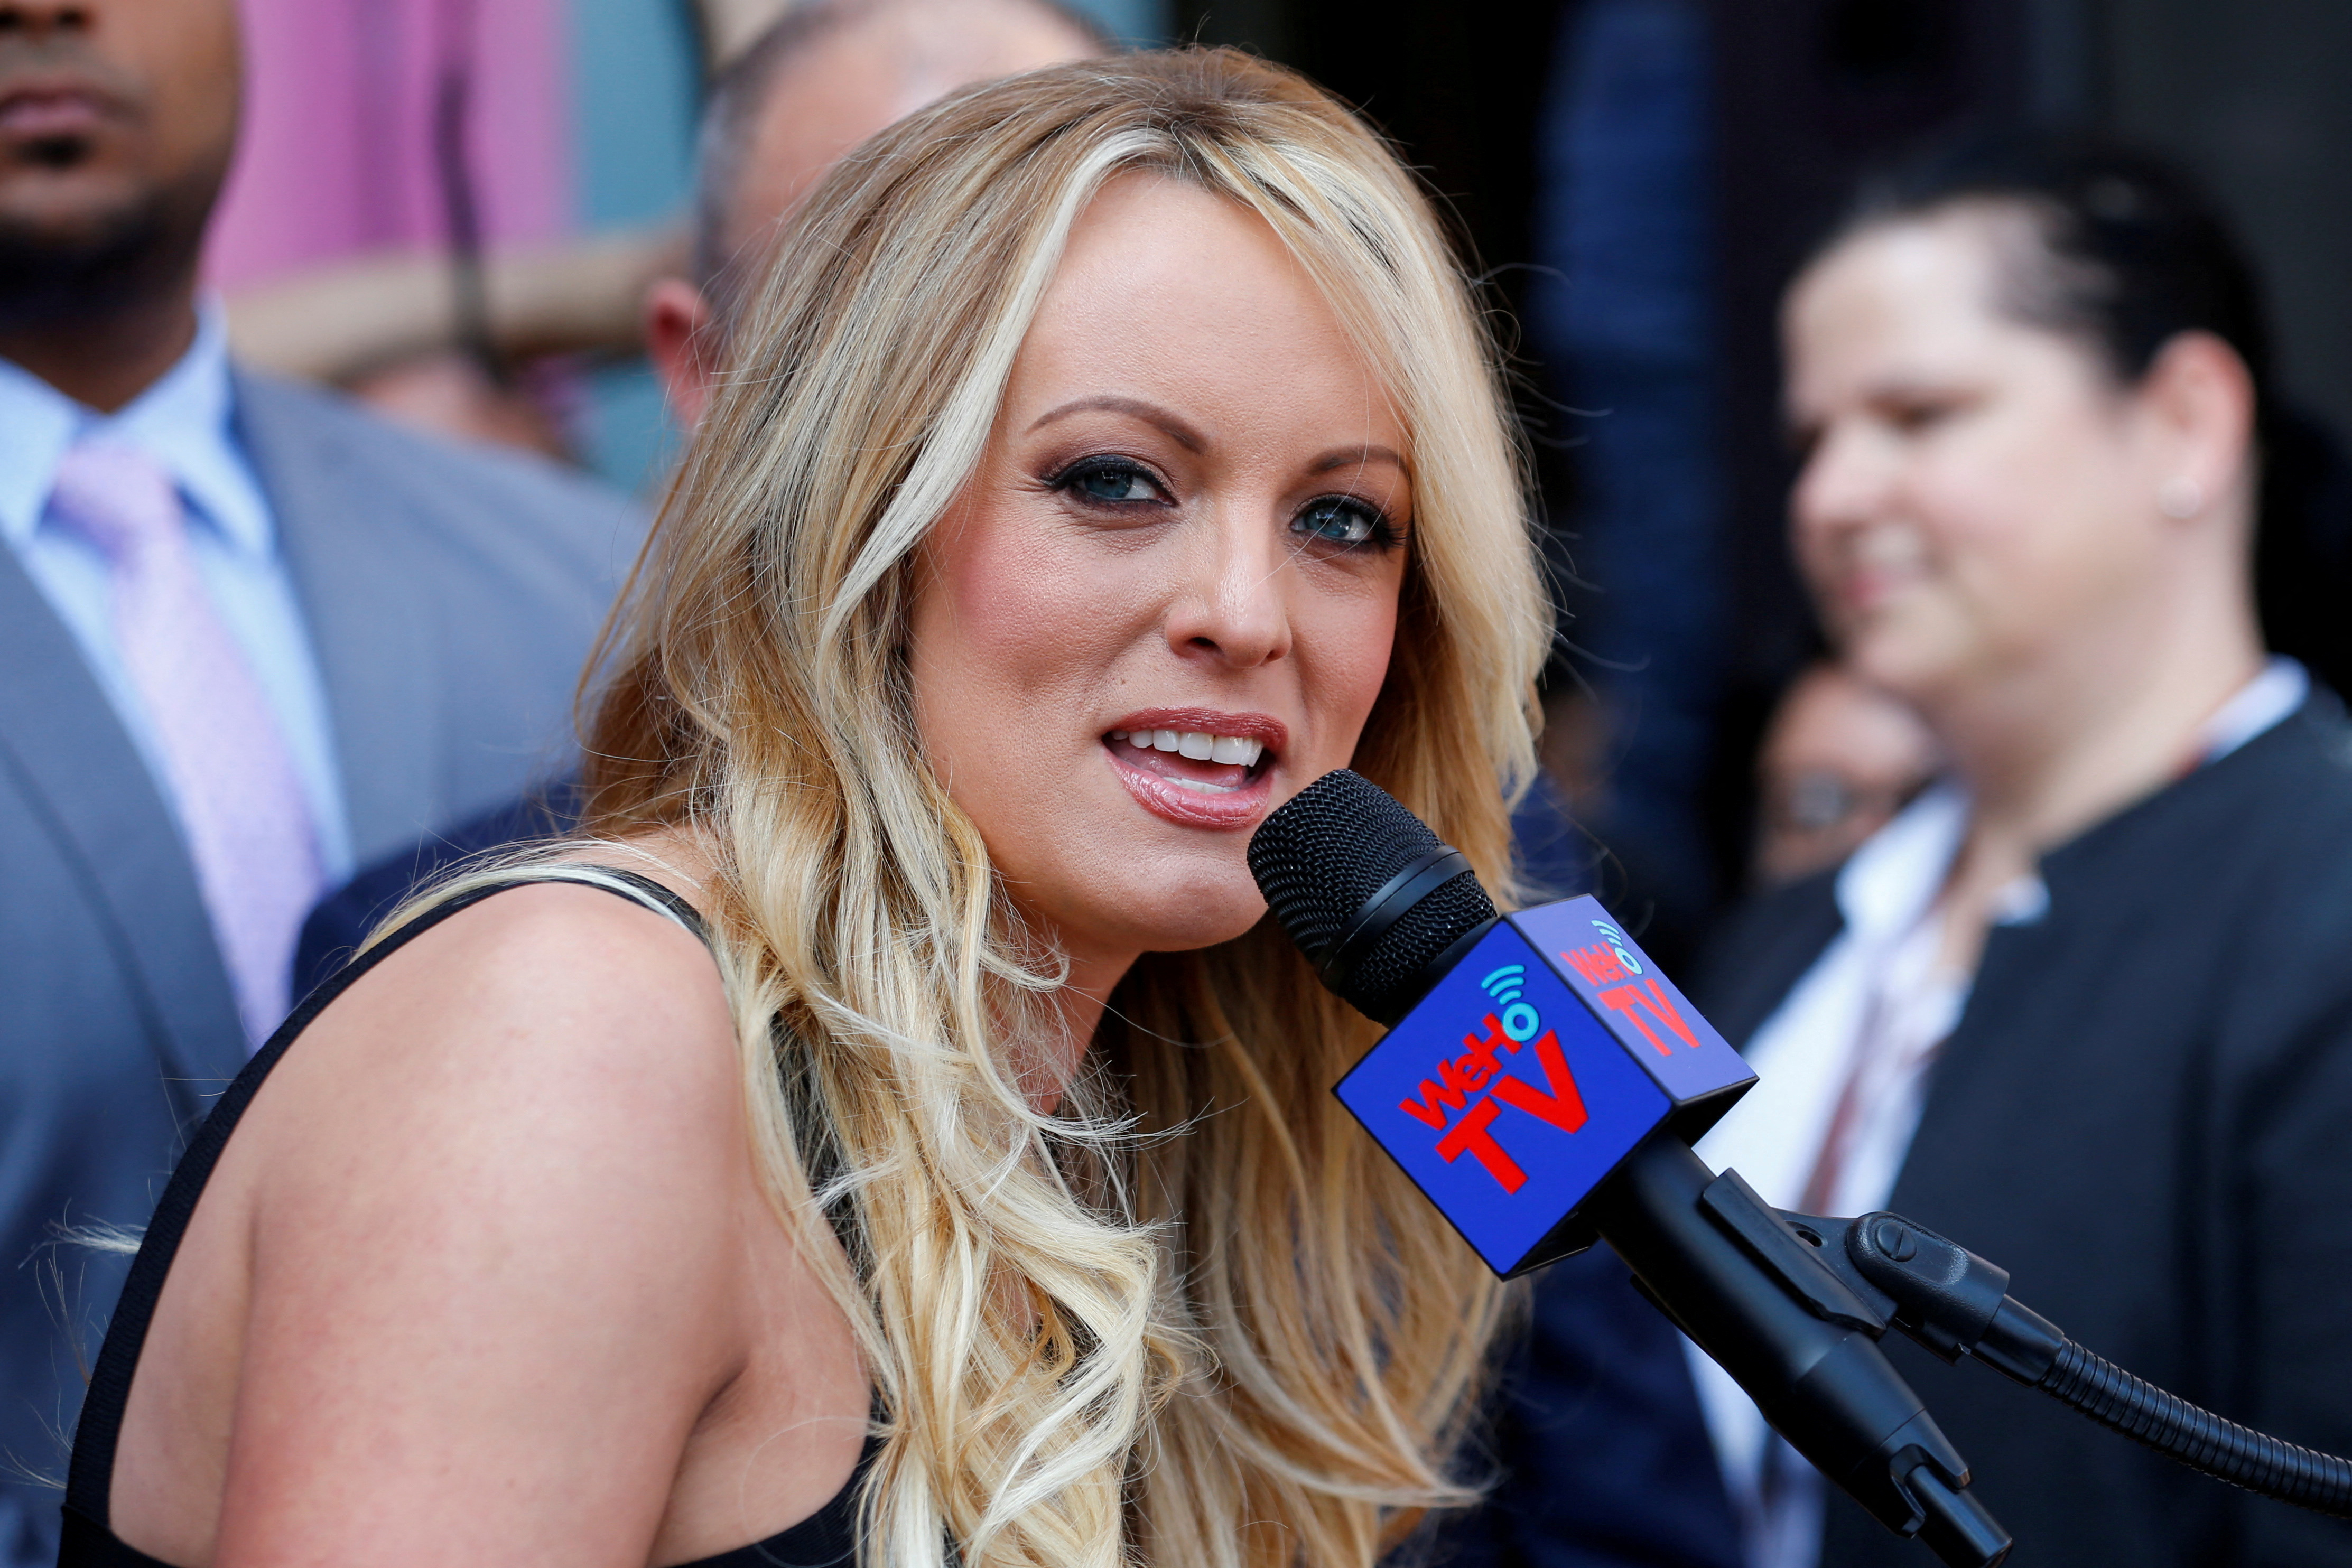 Who is Stormy Daniels and how is she involved in the Donald Trump indictment? Reuters